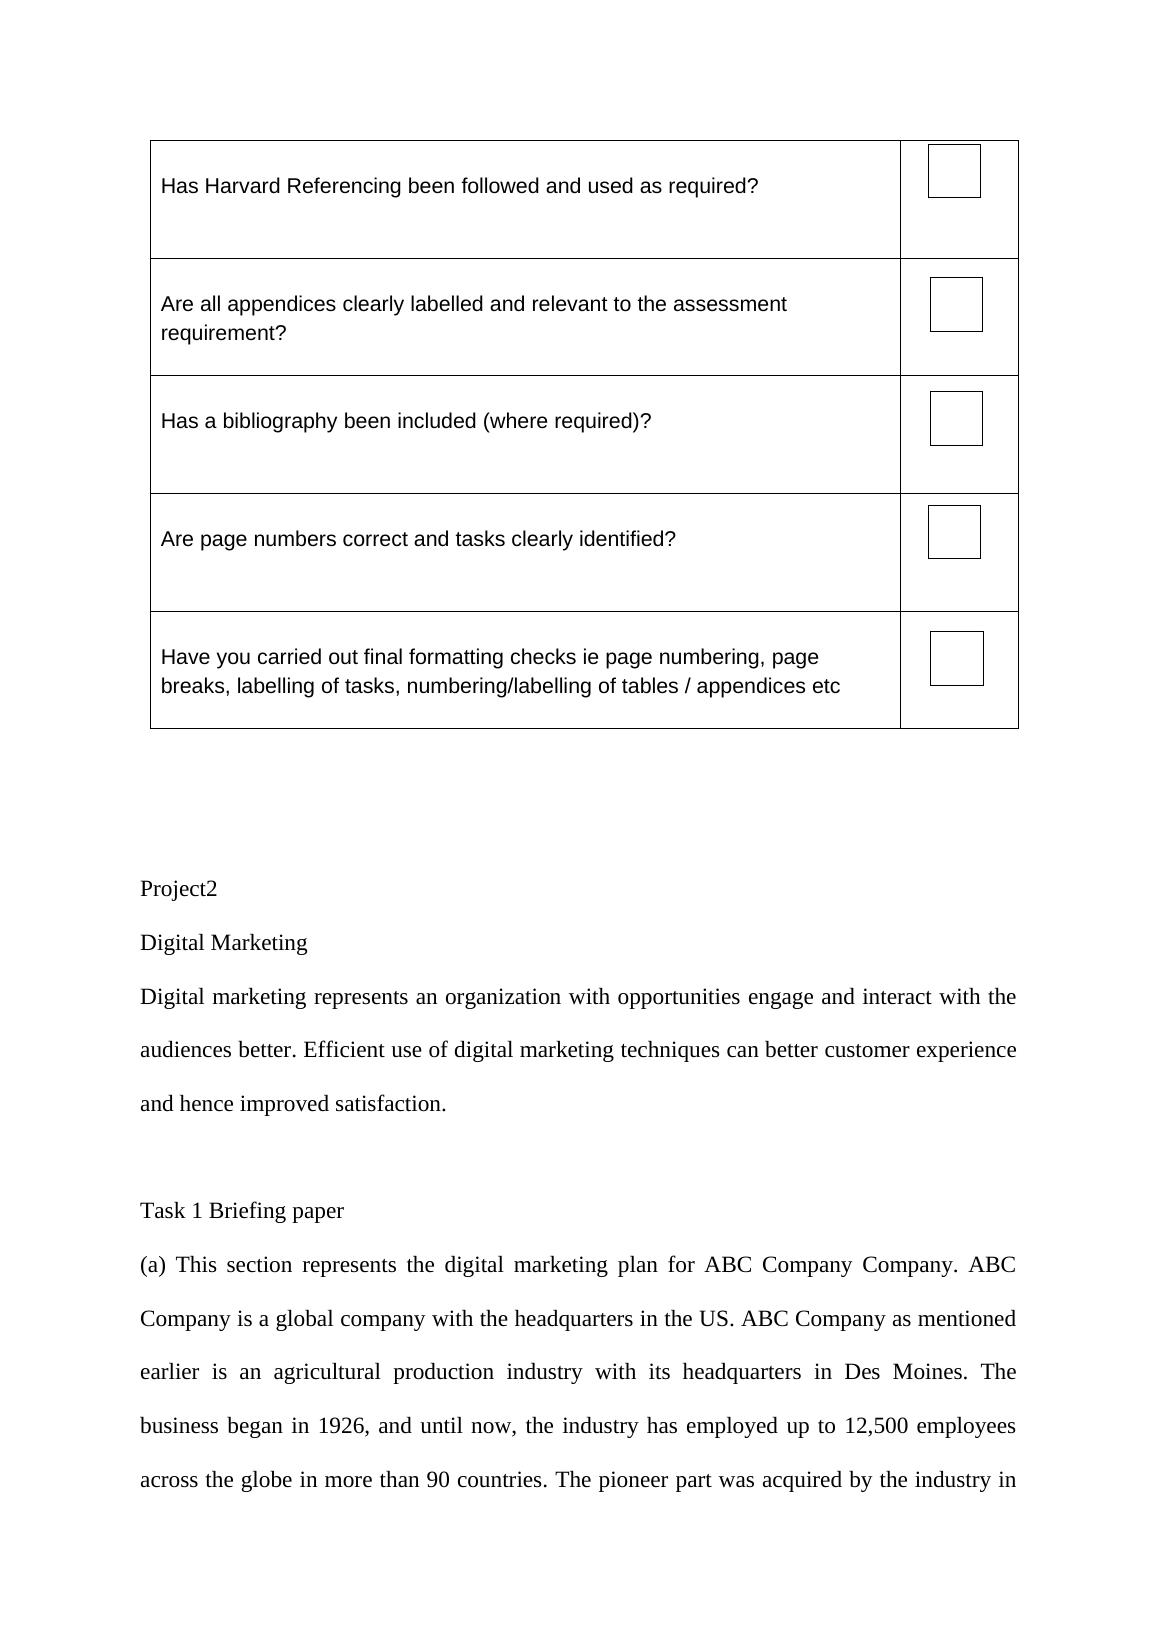 cim innovation in marketing assignment example